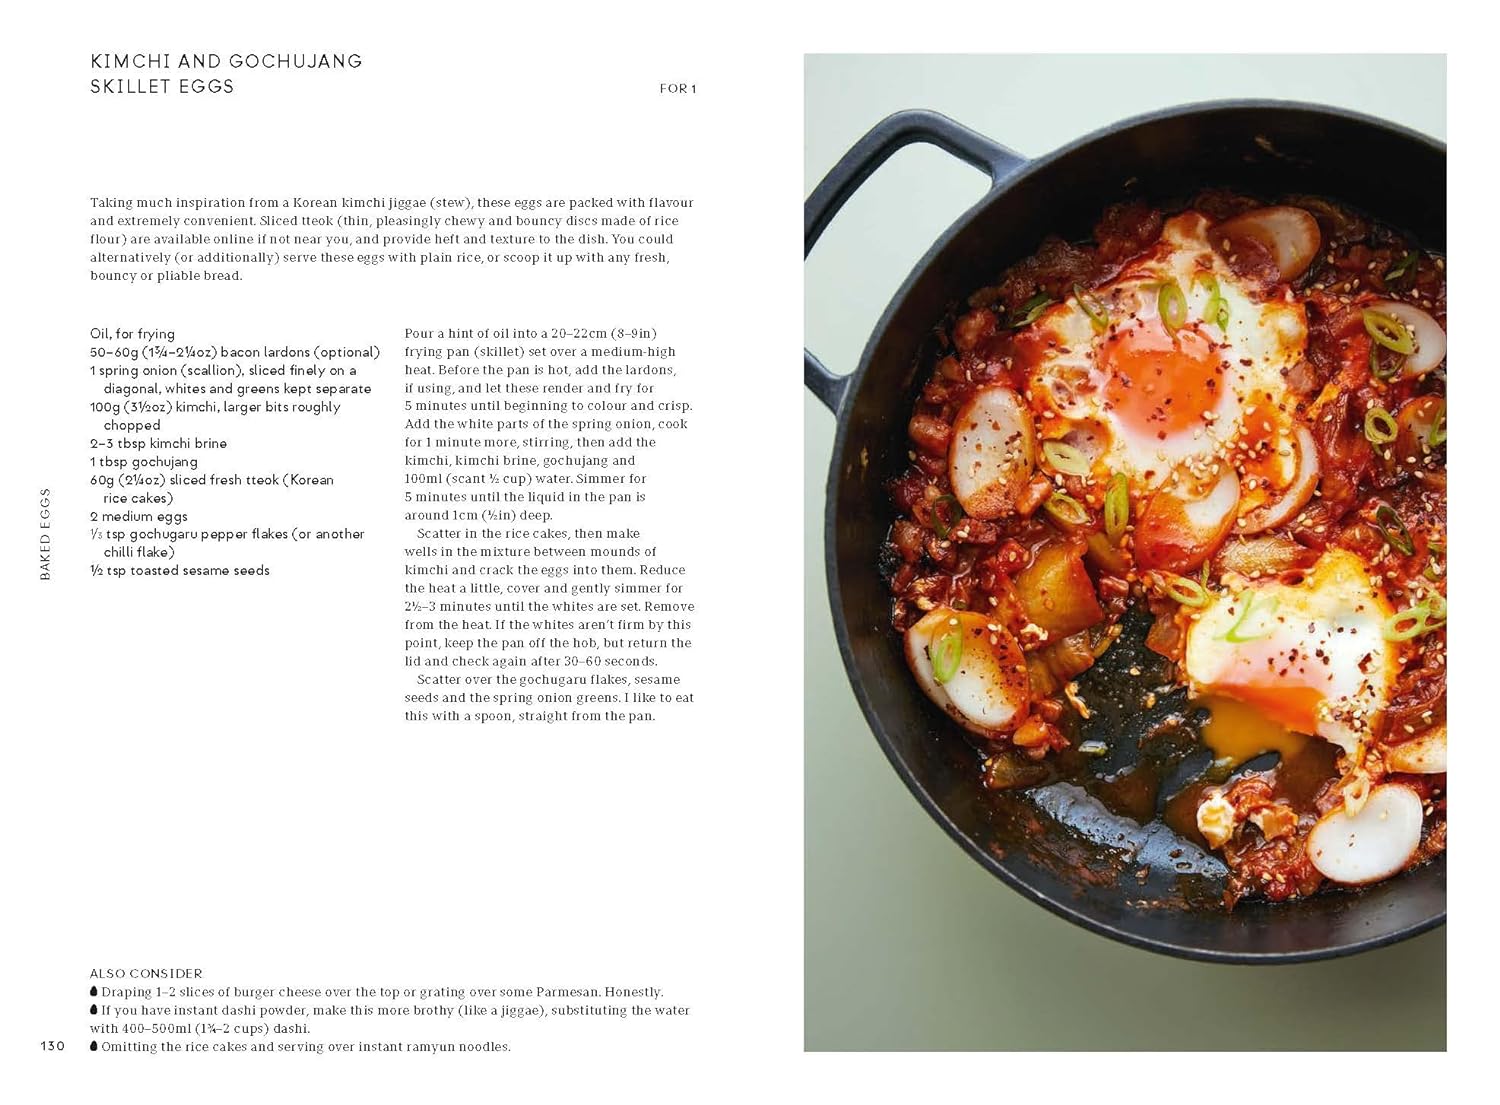 Good Eggs: Over 100 Cracking Ways to Cook and Elevate Eggs (Ed Smith)